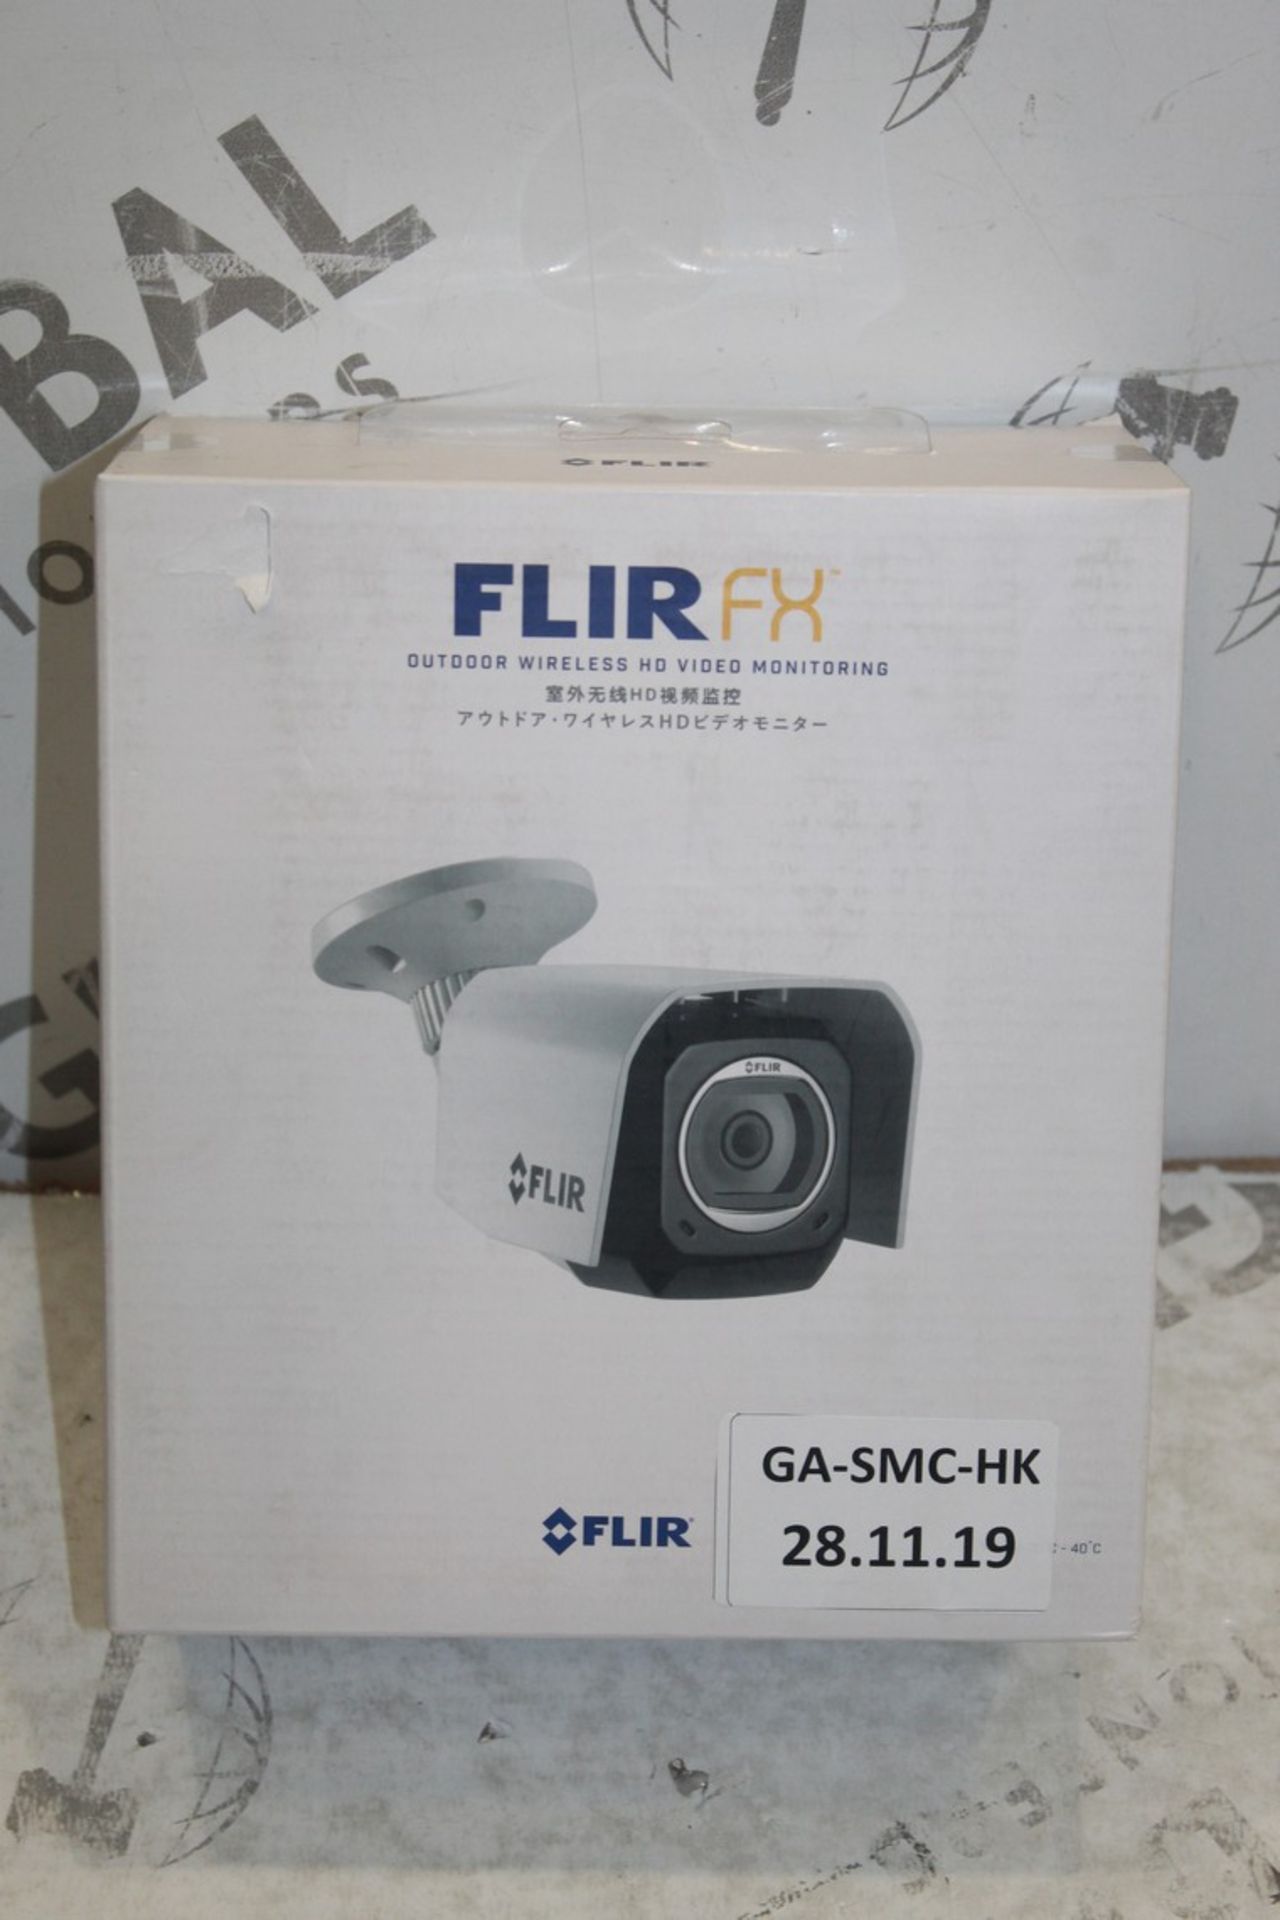 Boxed Flair FX Outdoor Wireless HD Video Monitoring CCTV Camera RRP £350 (Appraisals Available On